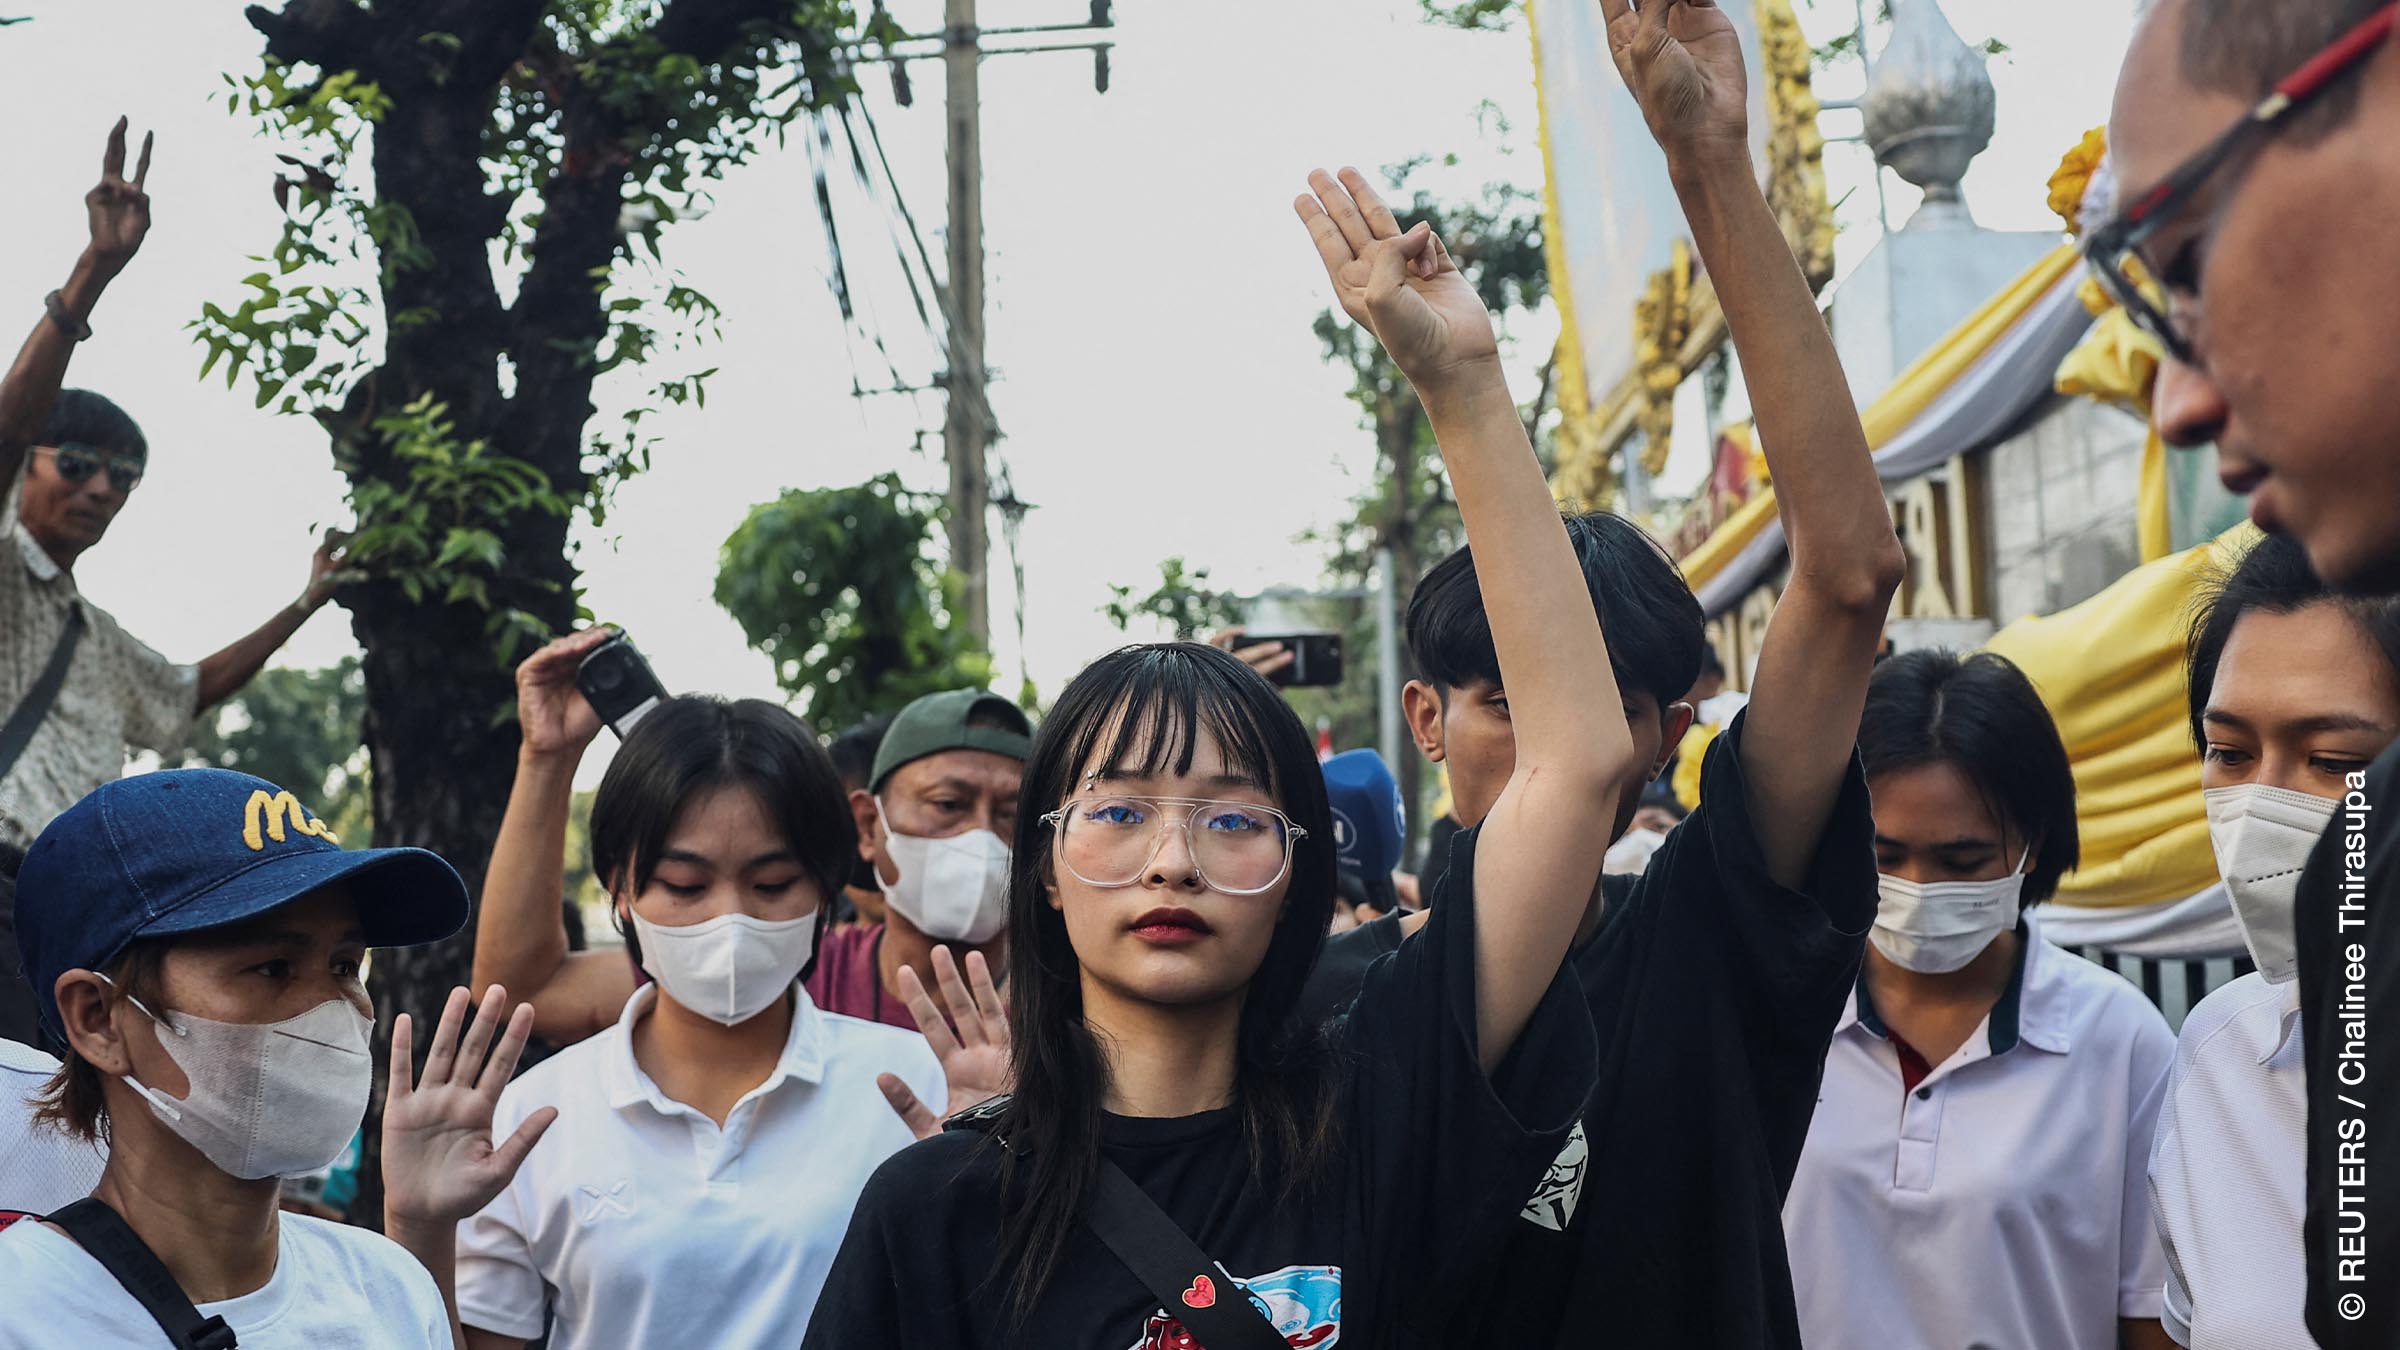 Intersectional Powers of Digital Repression: How Activists are Digitally Watched, Charged, and Stigmatized in Thailand